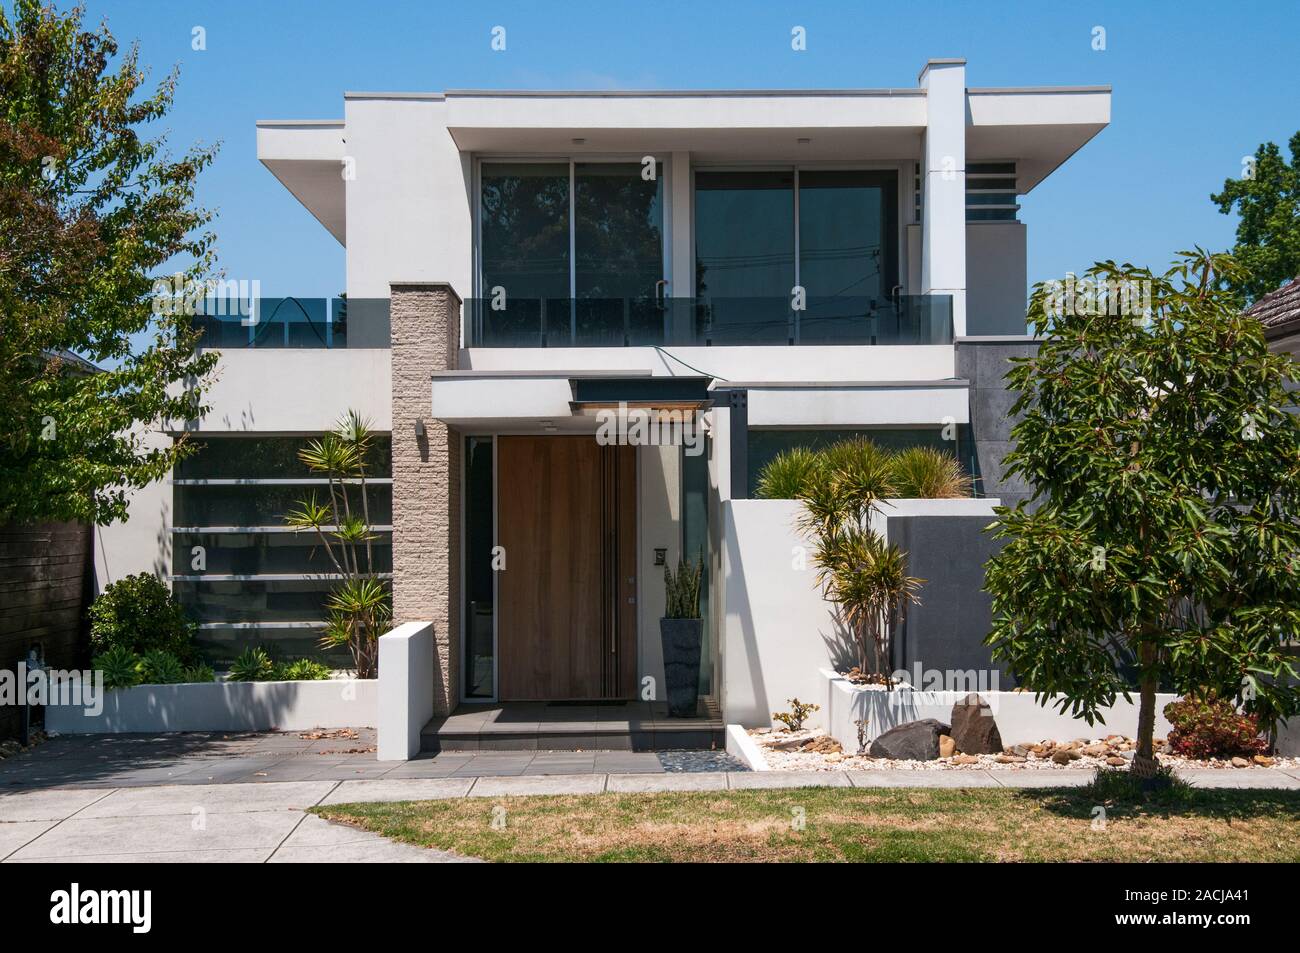 Starkly modern new home in a southeastern suburb of Melbourne, Australia Stock Photo